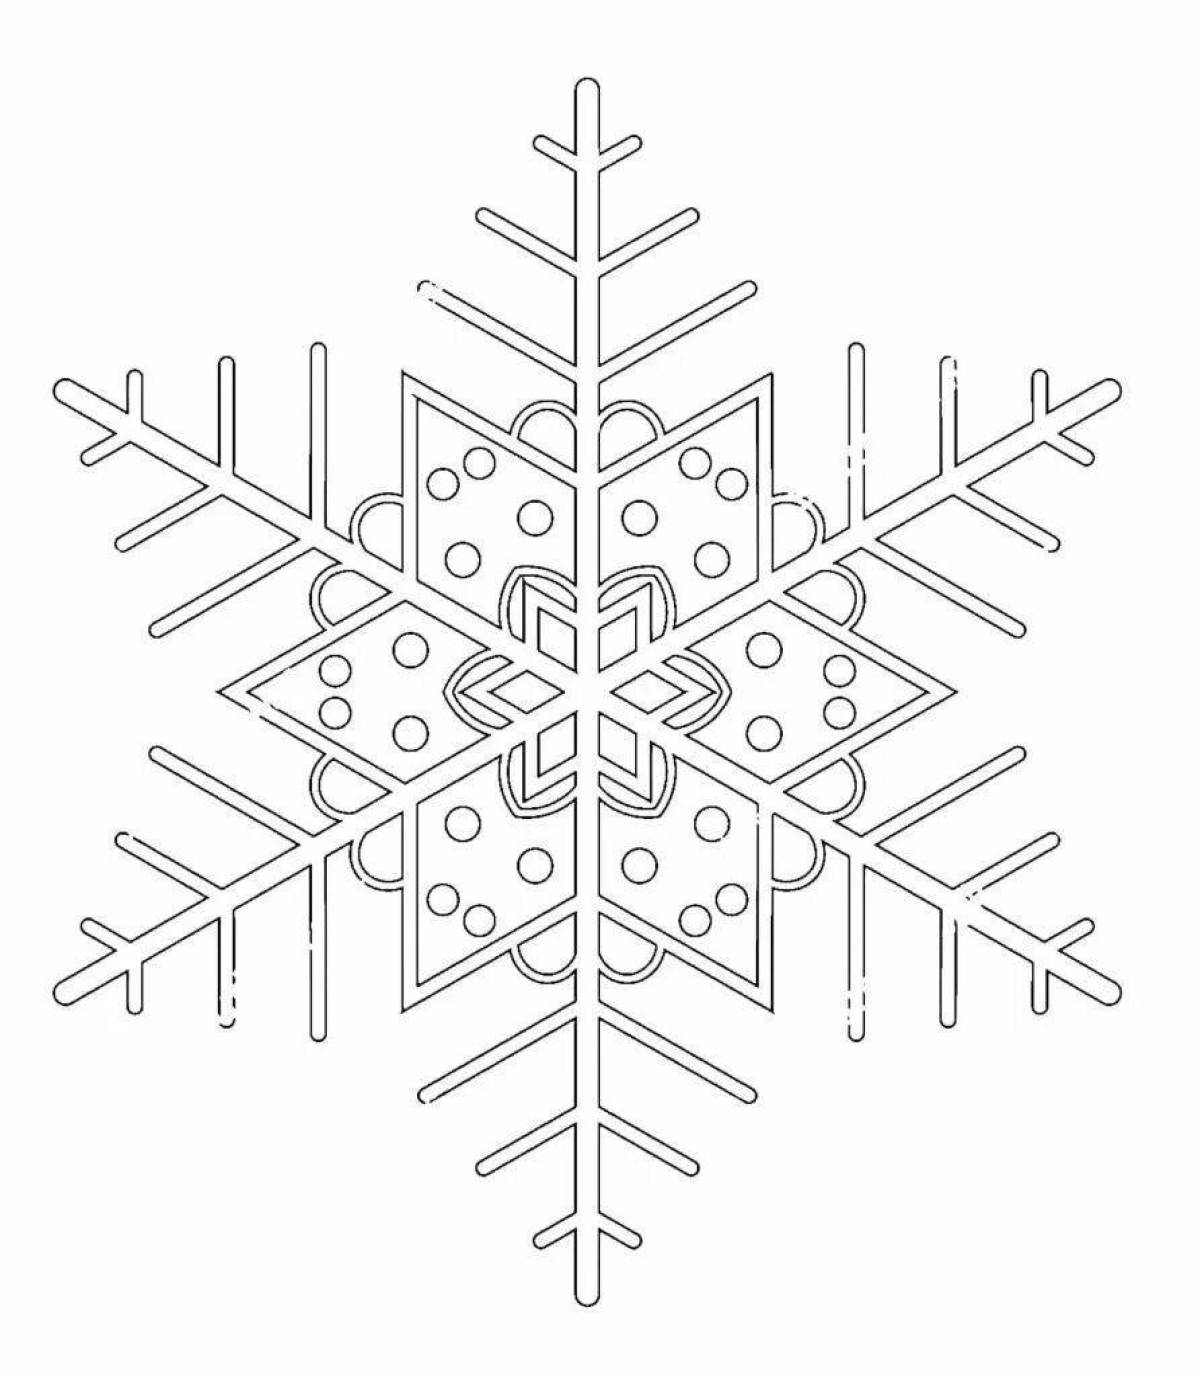 Shining snowflake coloring book for 4-5 year olds in kindergarten